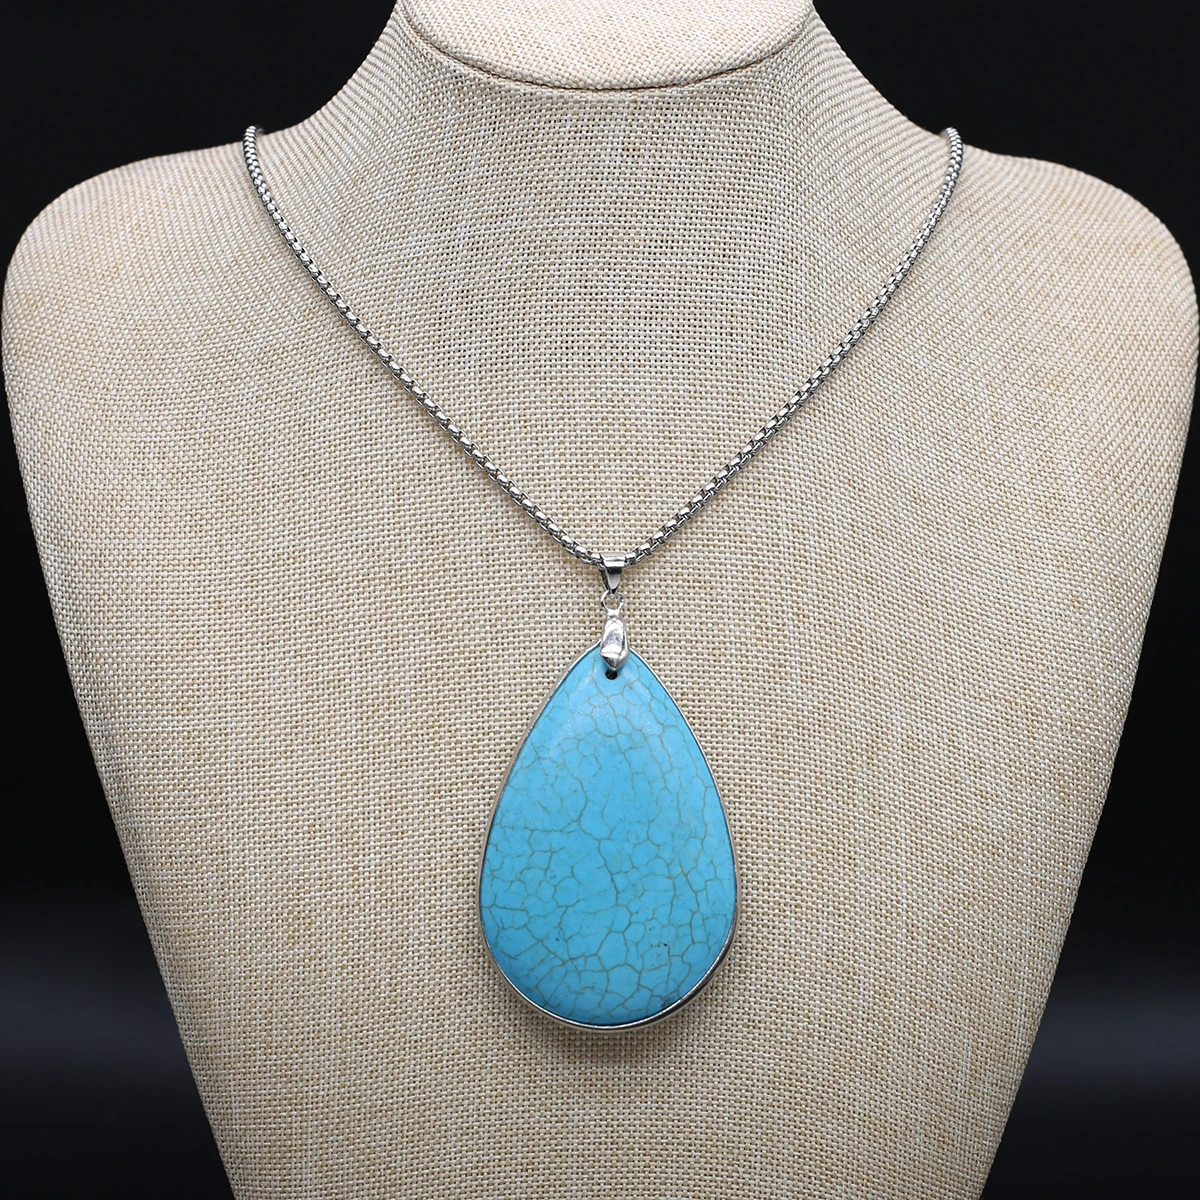 Купи Natural Stone Turquoise geometry Pendant Necklace Metal Chain Jewelry for Making DIY Necklace Accessories Gifts за 168 рублей в магазине AliExpress